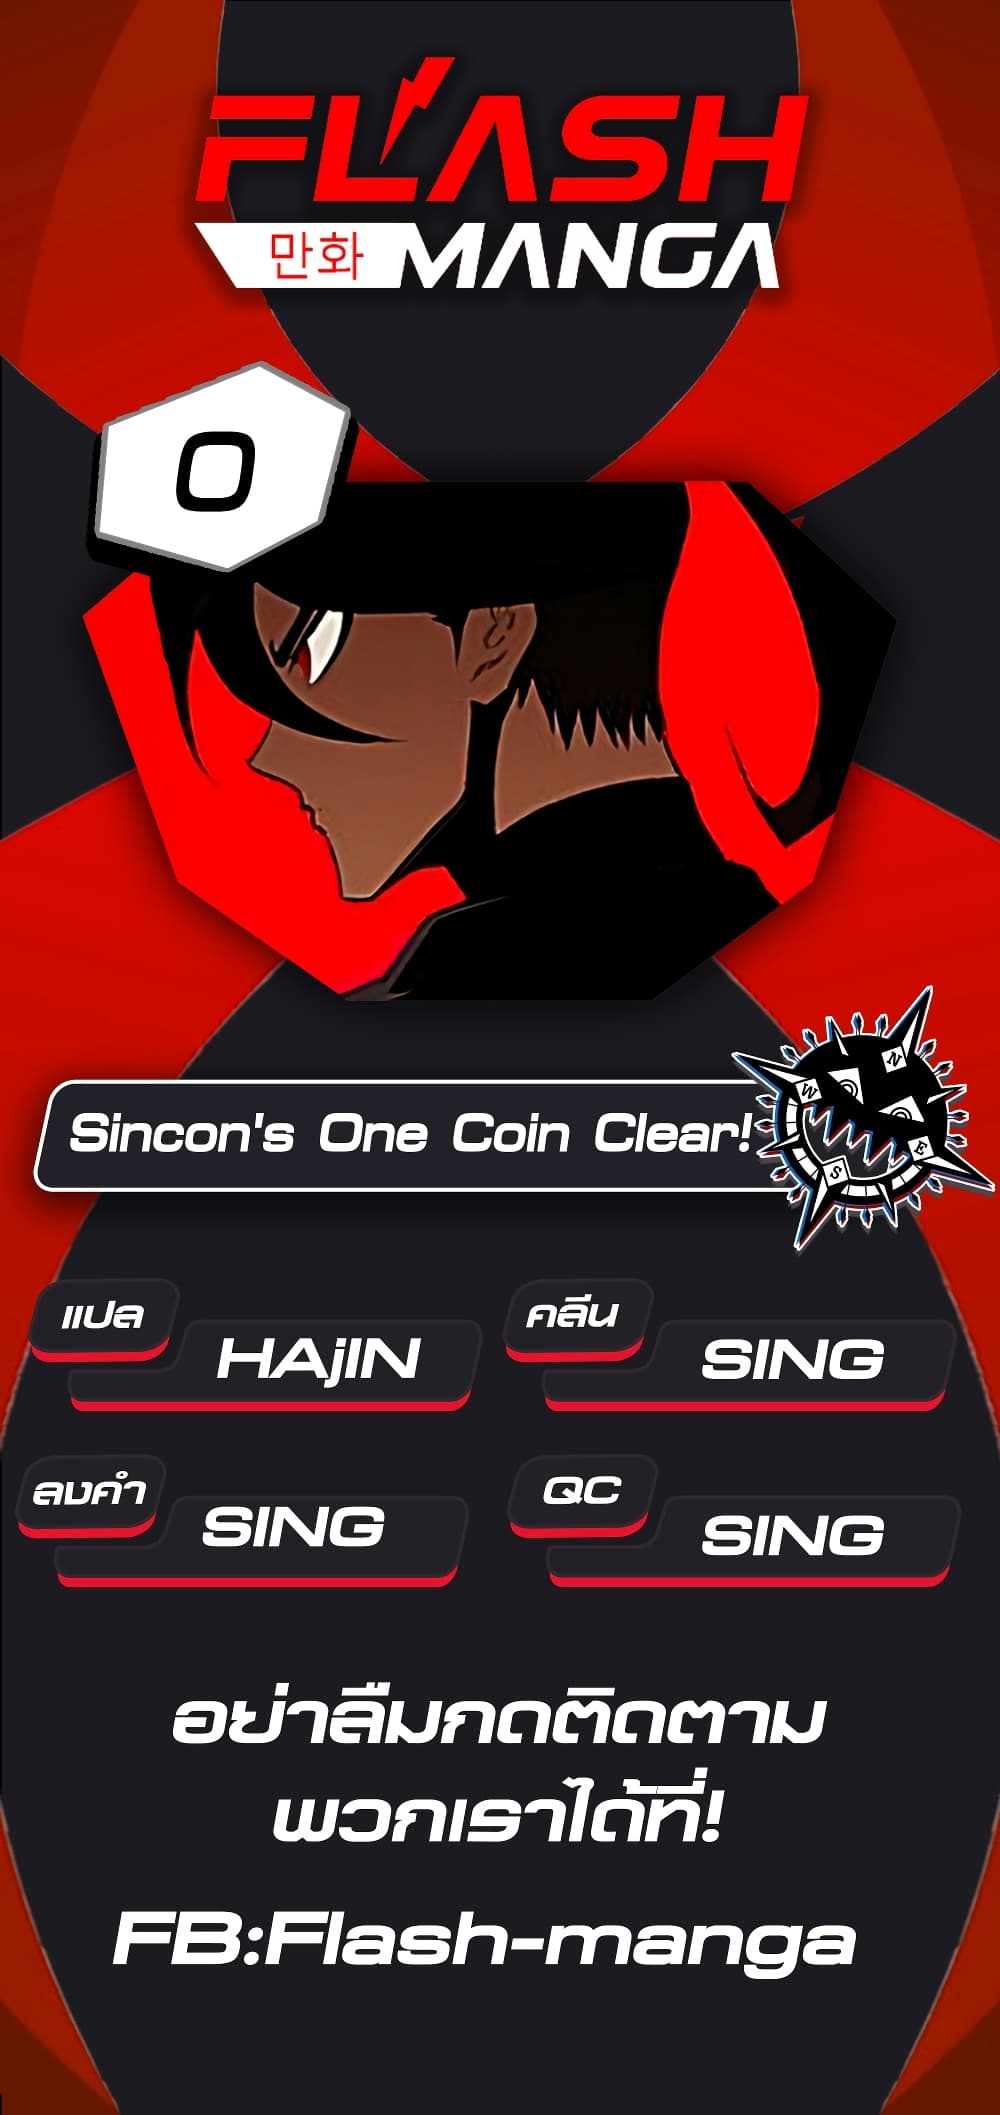 Sincon's One Coin Clear 0-0